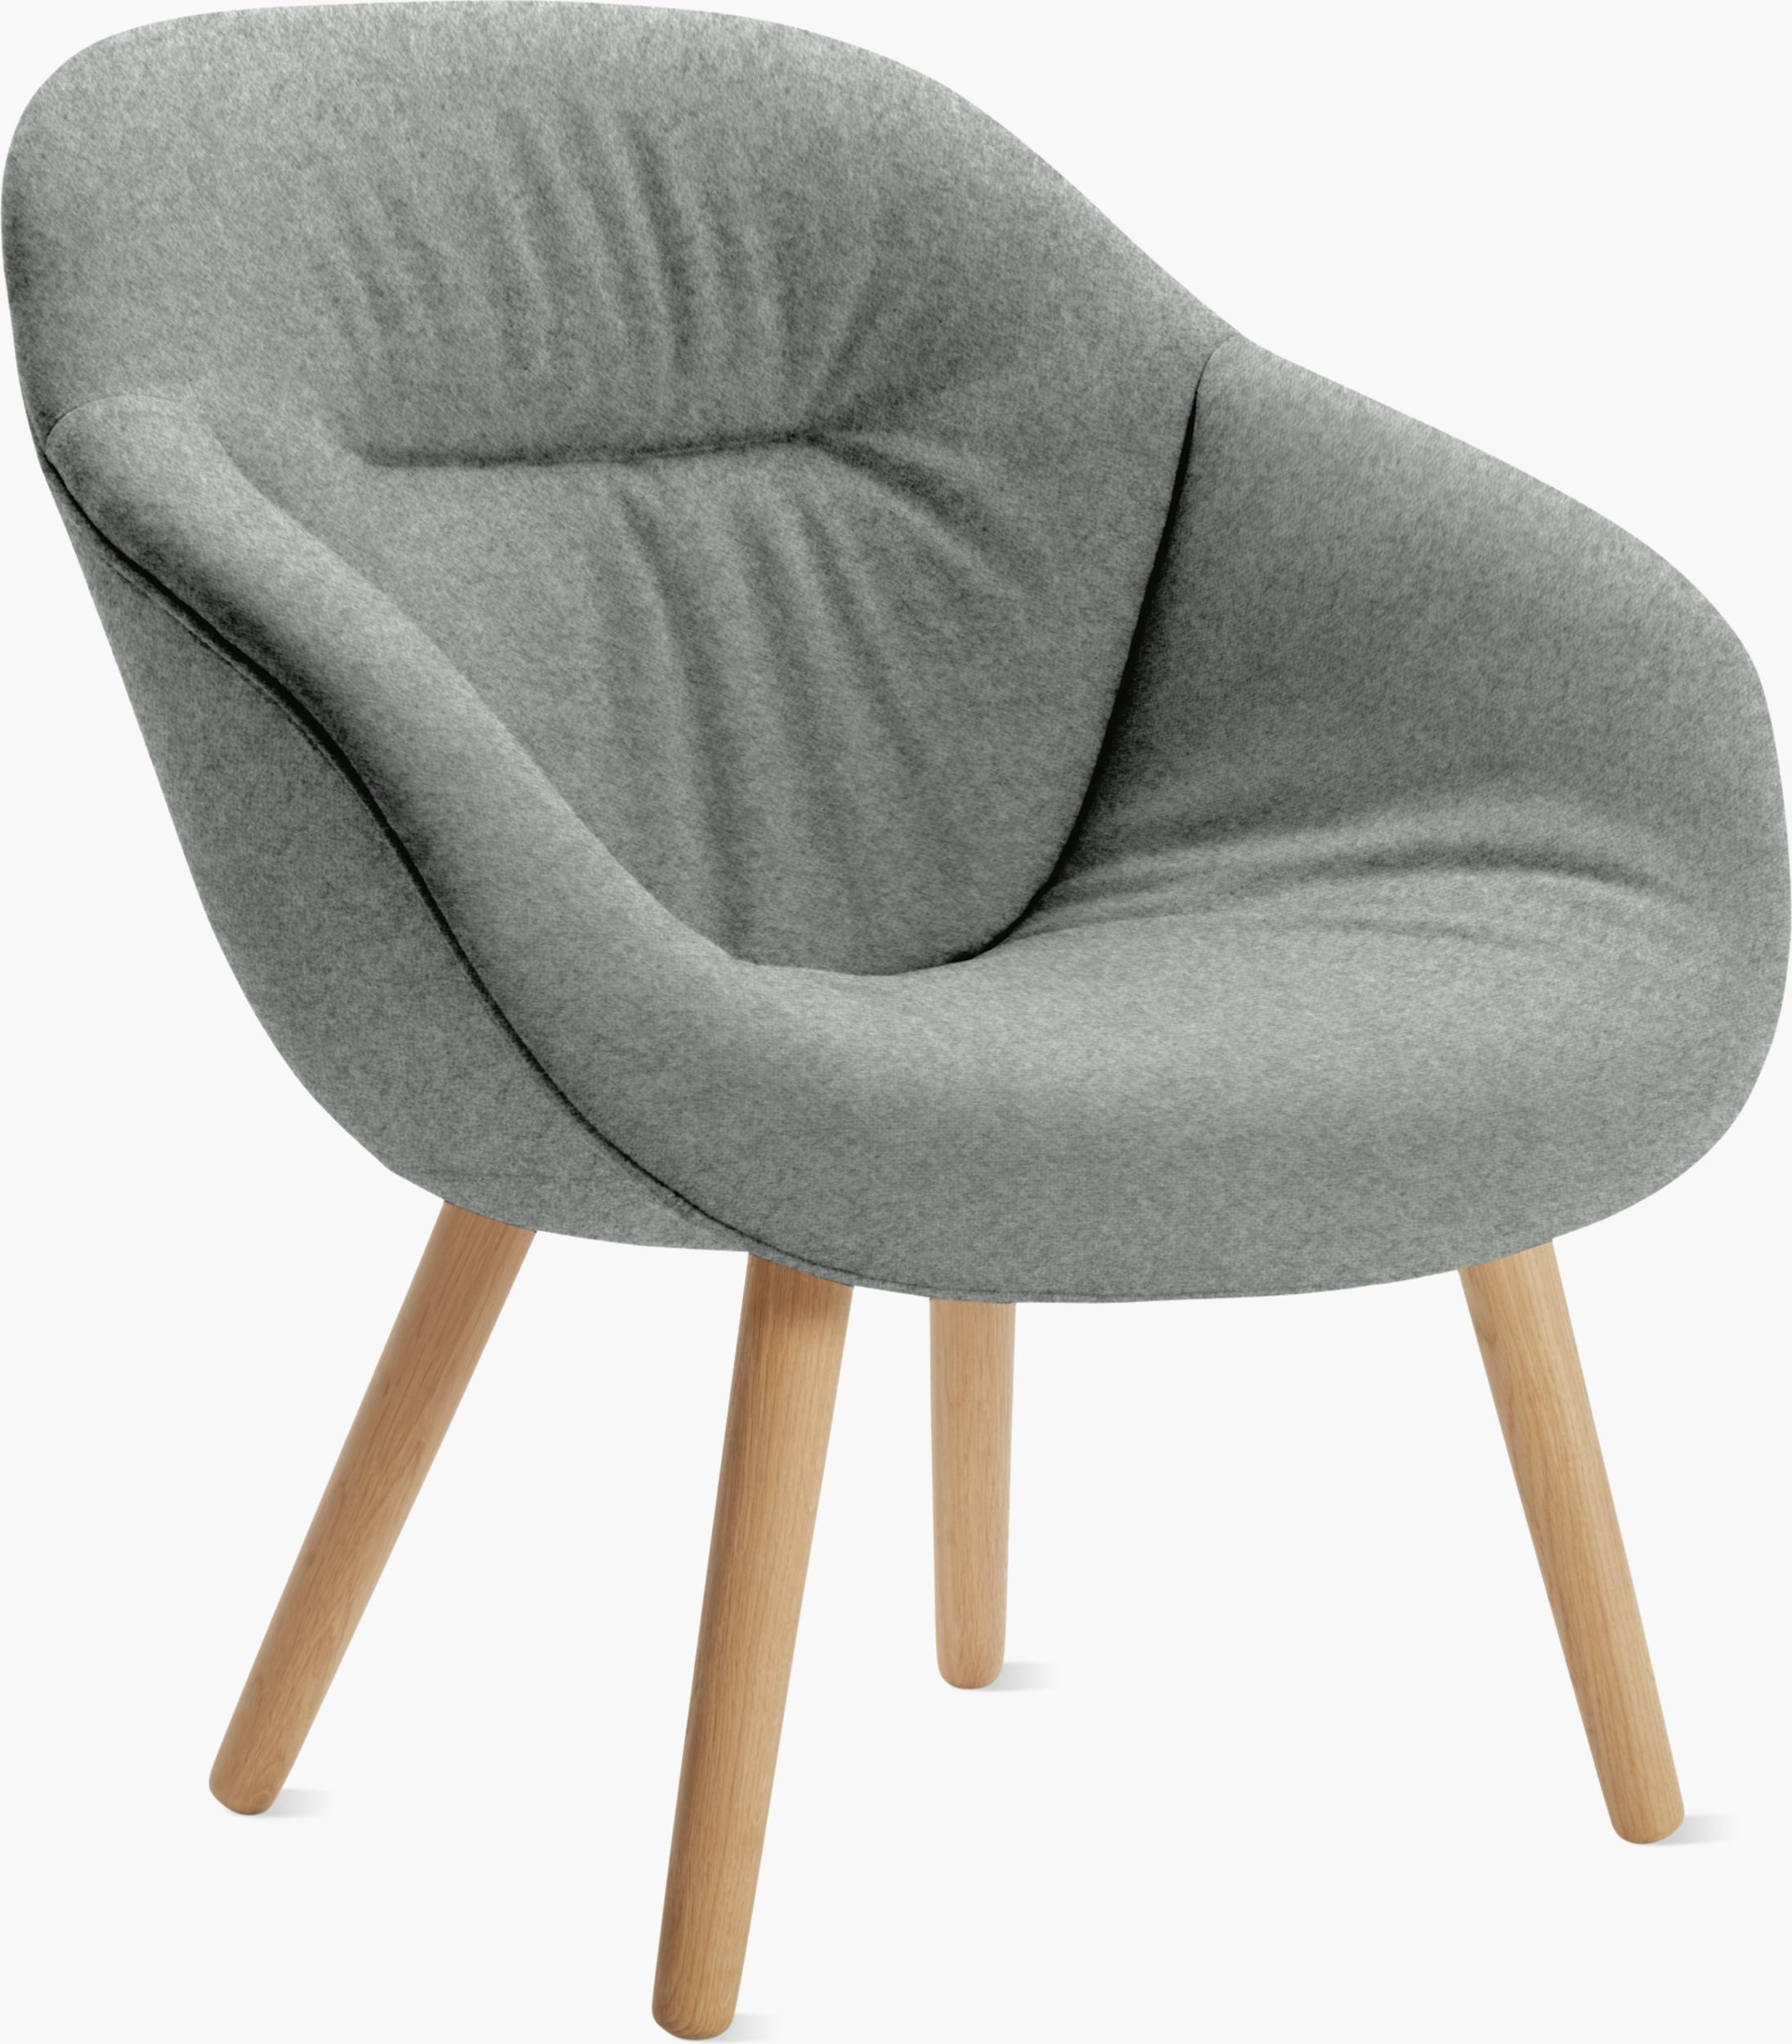 About A Lounge 82 Armchair, Low Back – Design Within Reach